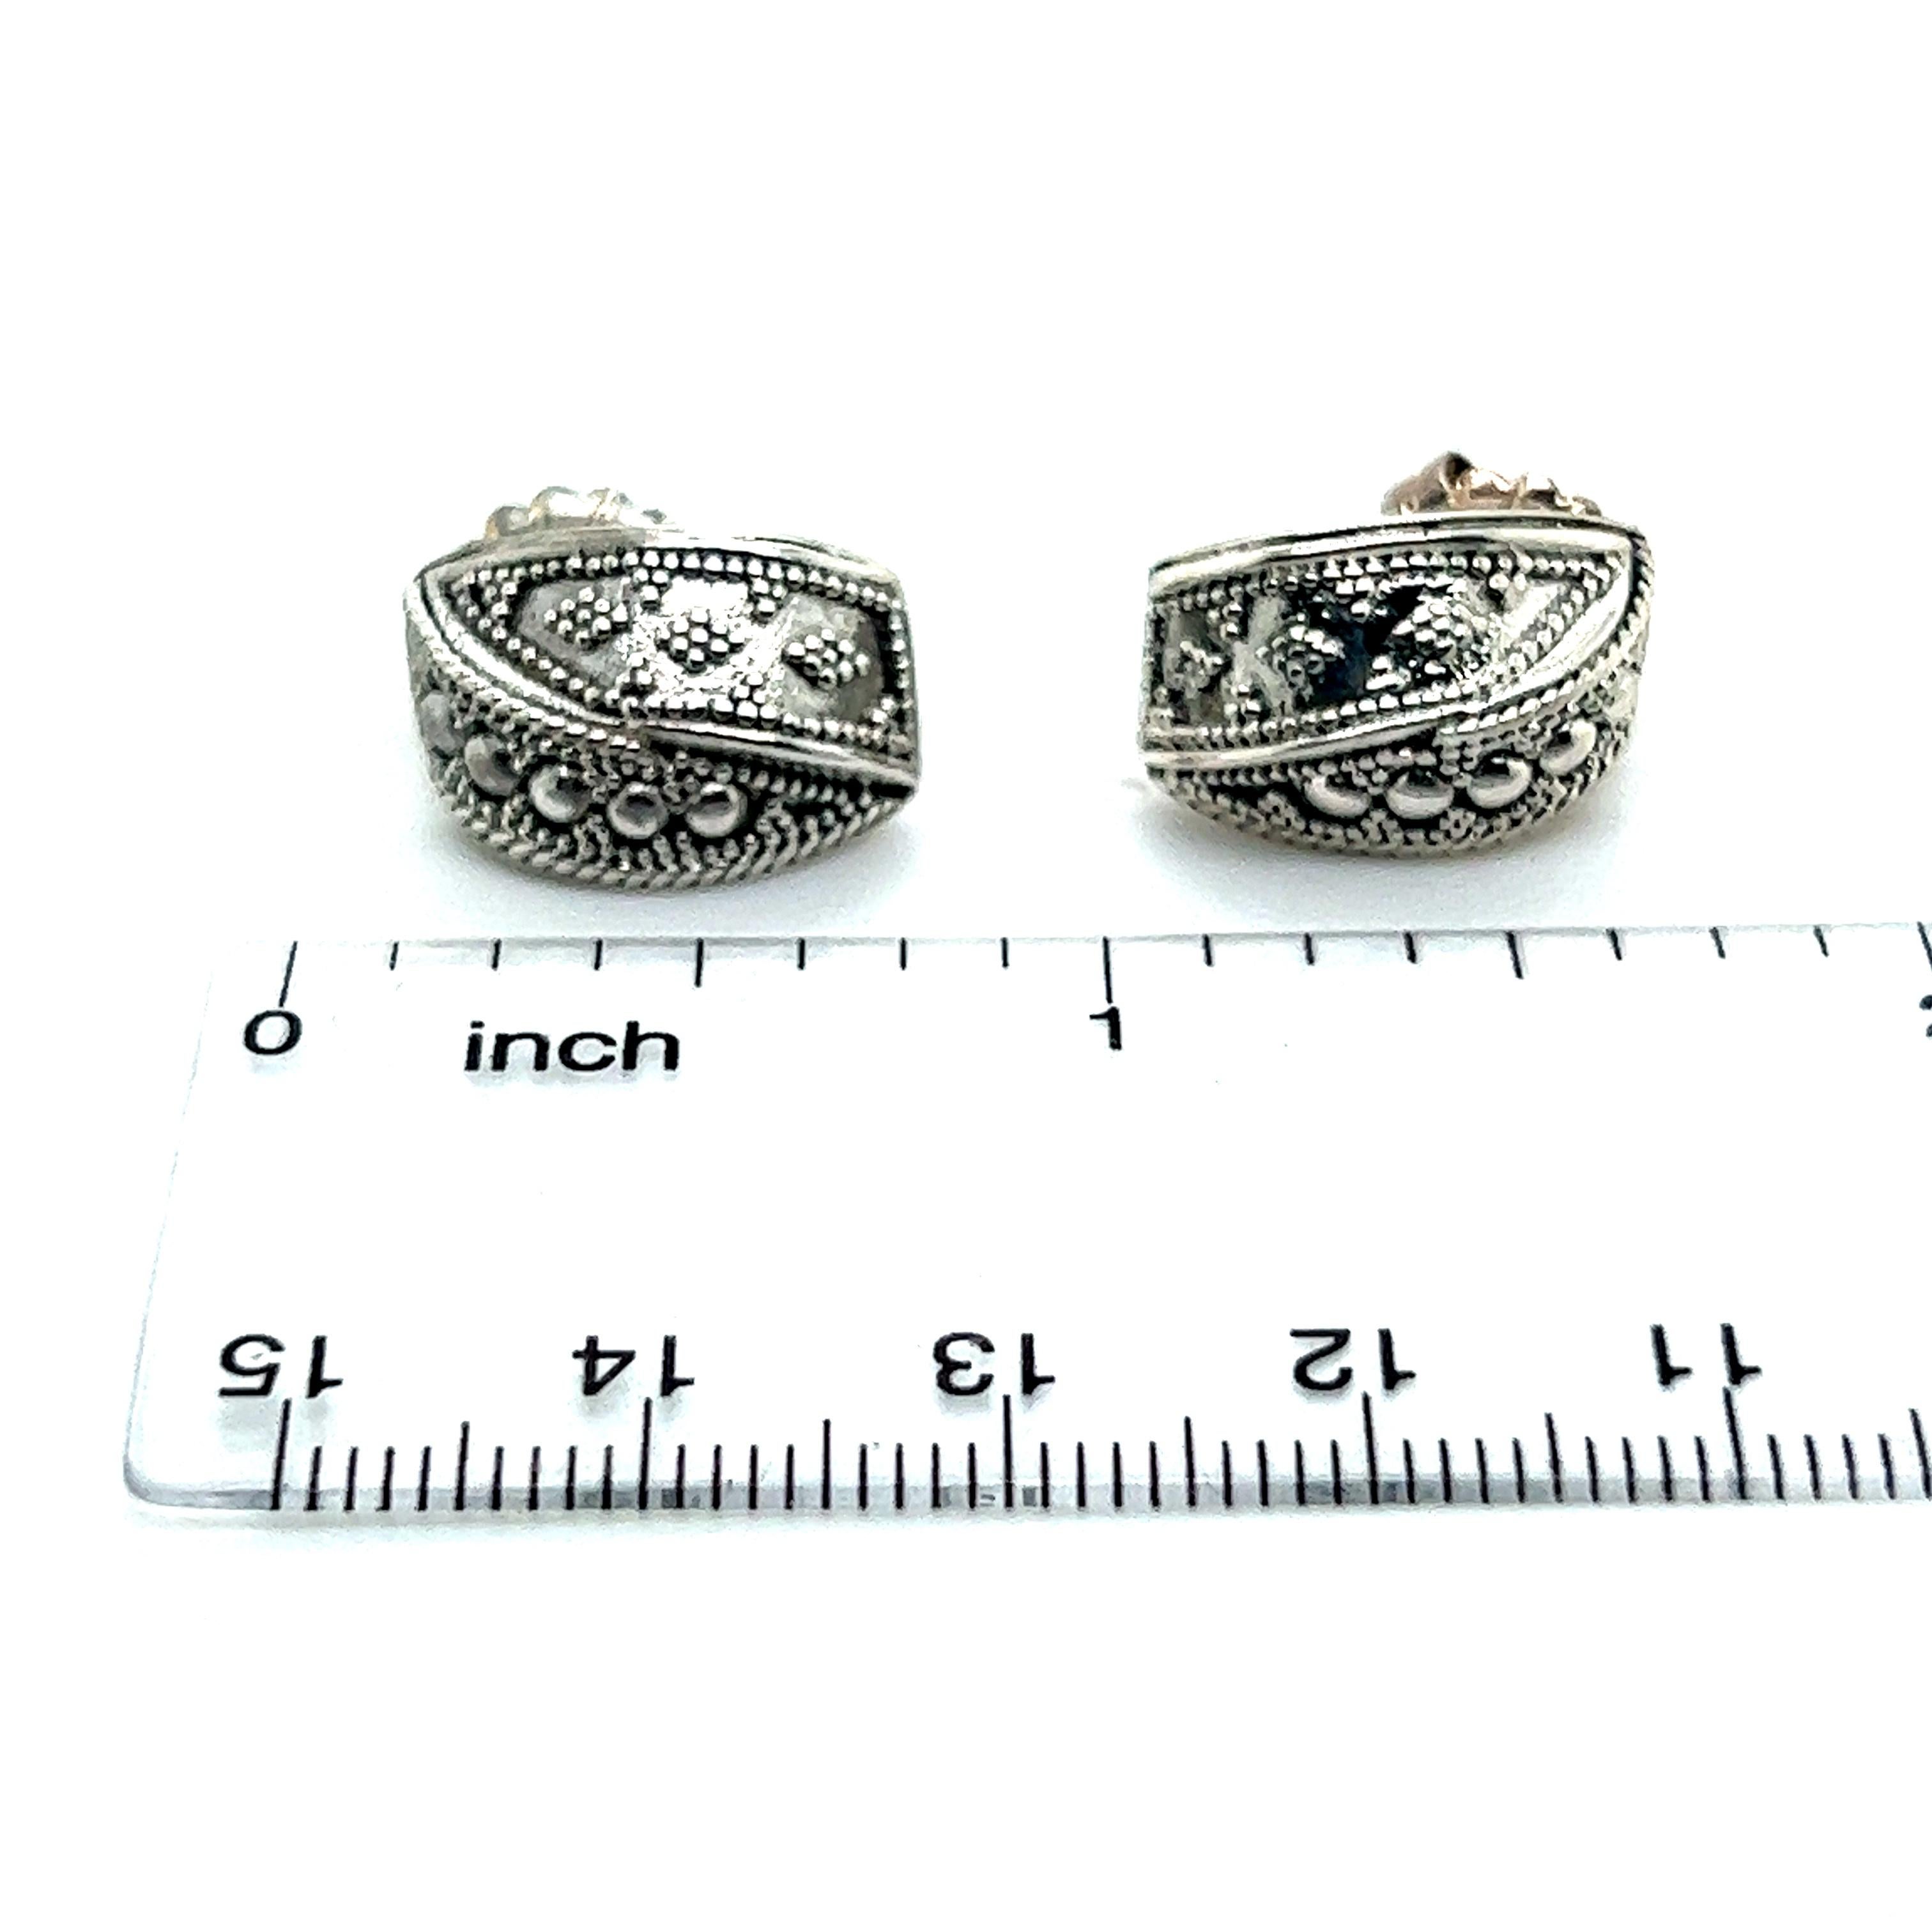 Authentic John Hardy Estate Stud Earrings Original Backs Silver JH46

TRUSTED SELLER SINCE 2002

PLEASE SEE OUR HUNDREDS OF POSITIVE FEEDBACKS FROM OUR CLIENTS!!

FREE SHIPPING!!

DETAILS
Style: Original Back
Weight: 7.04 Grams
Metal: Sterling